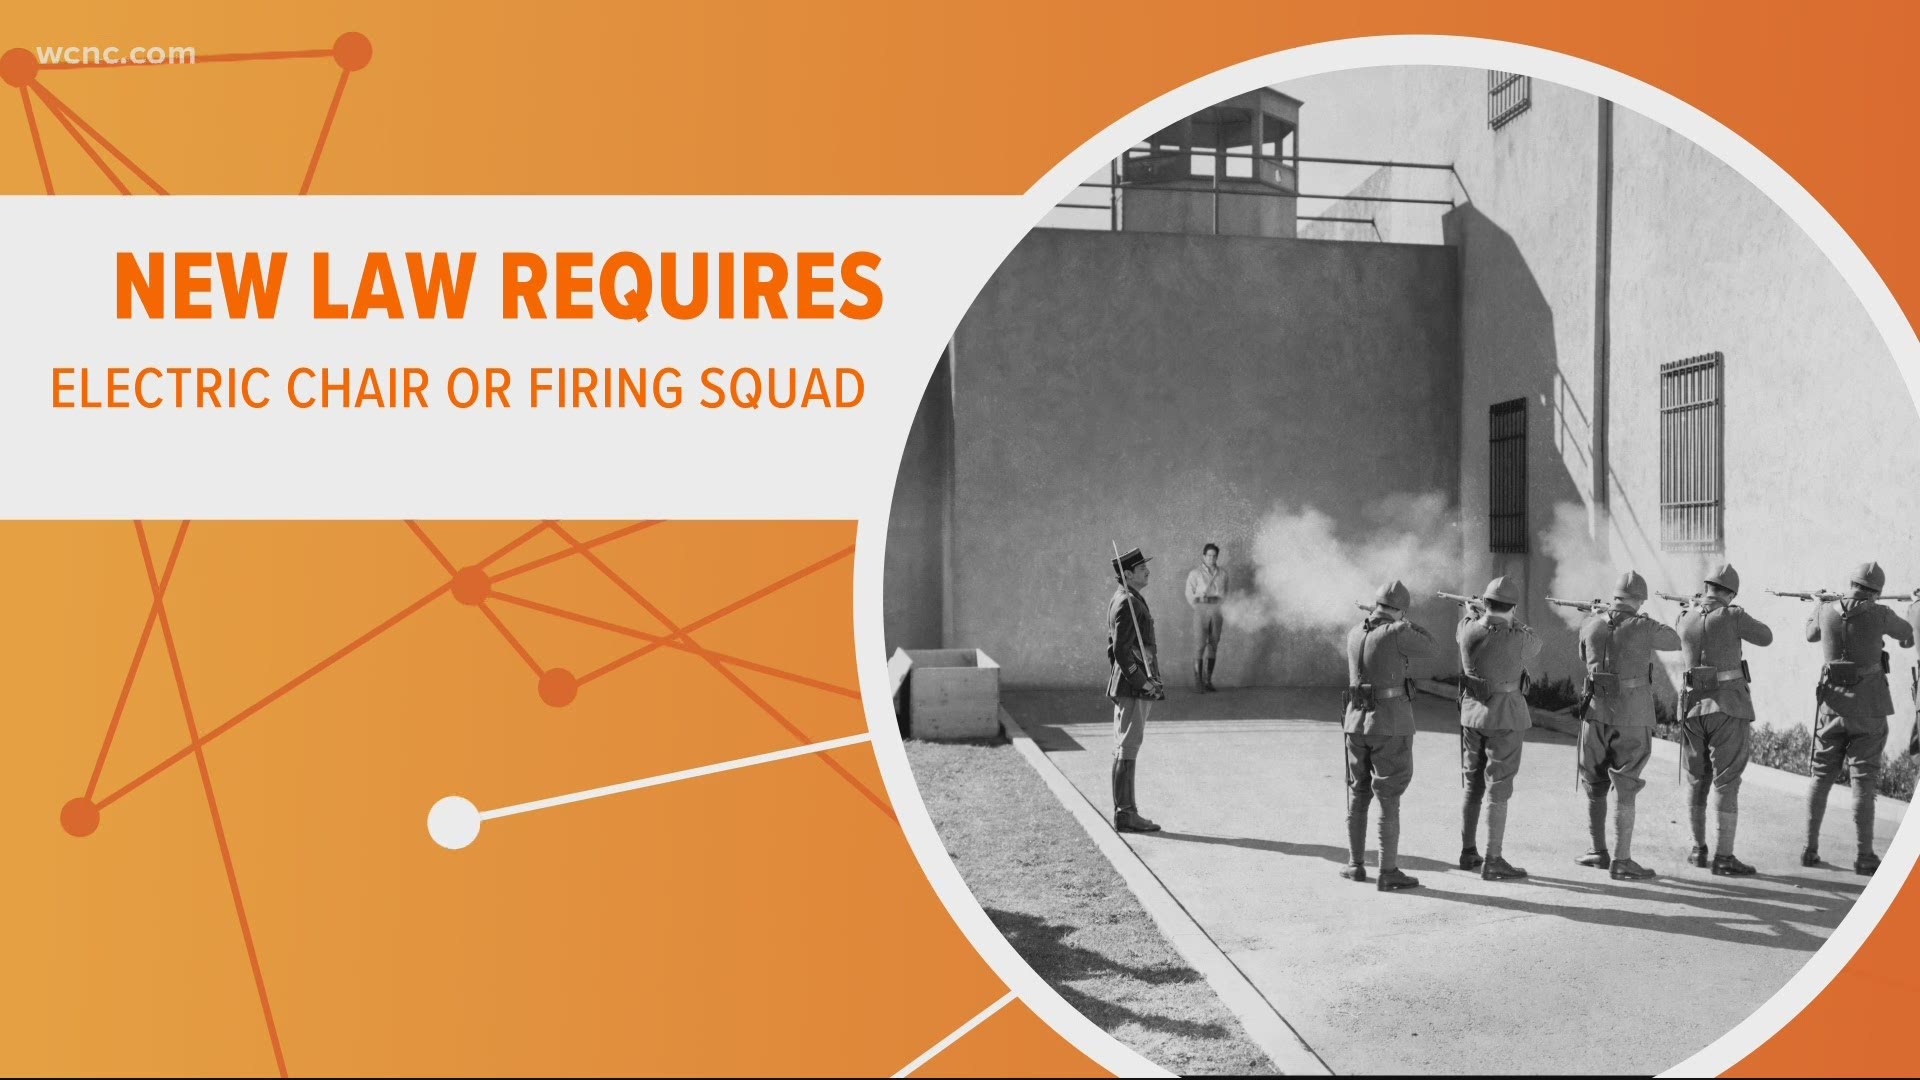 Lawmakers in South Carolina's House approved bringing back firing squads as an alternative method for state-sanctioned executions.